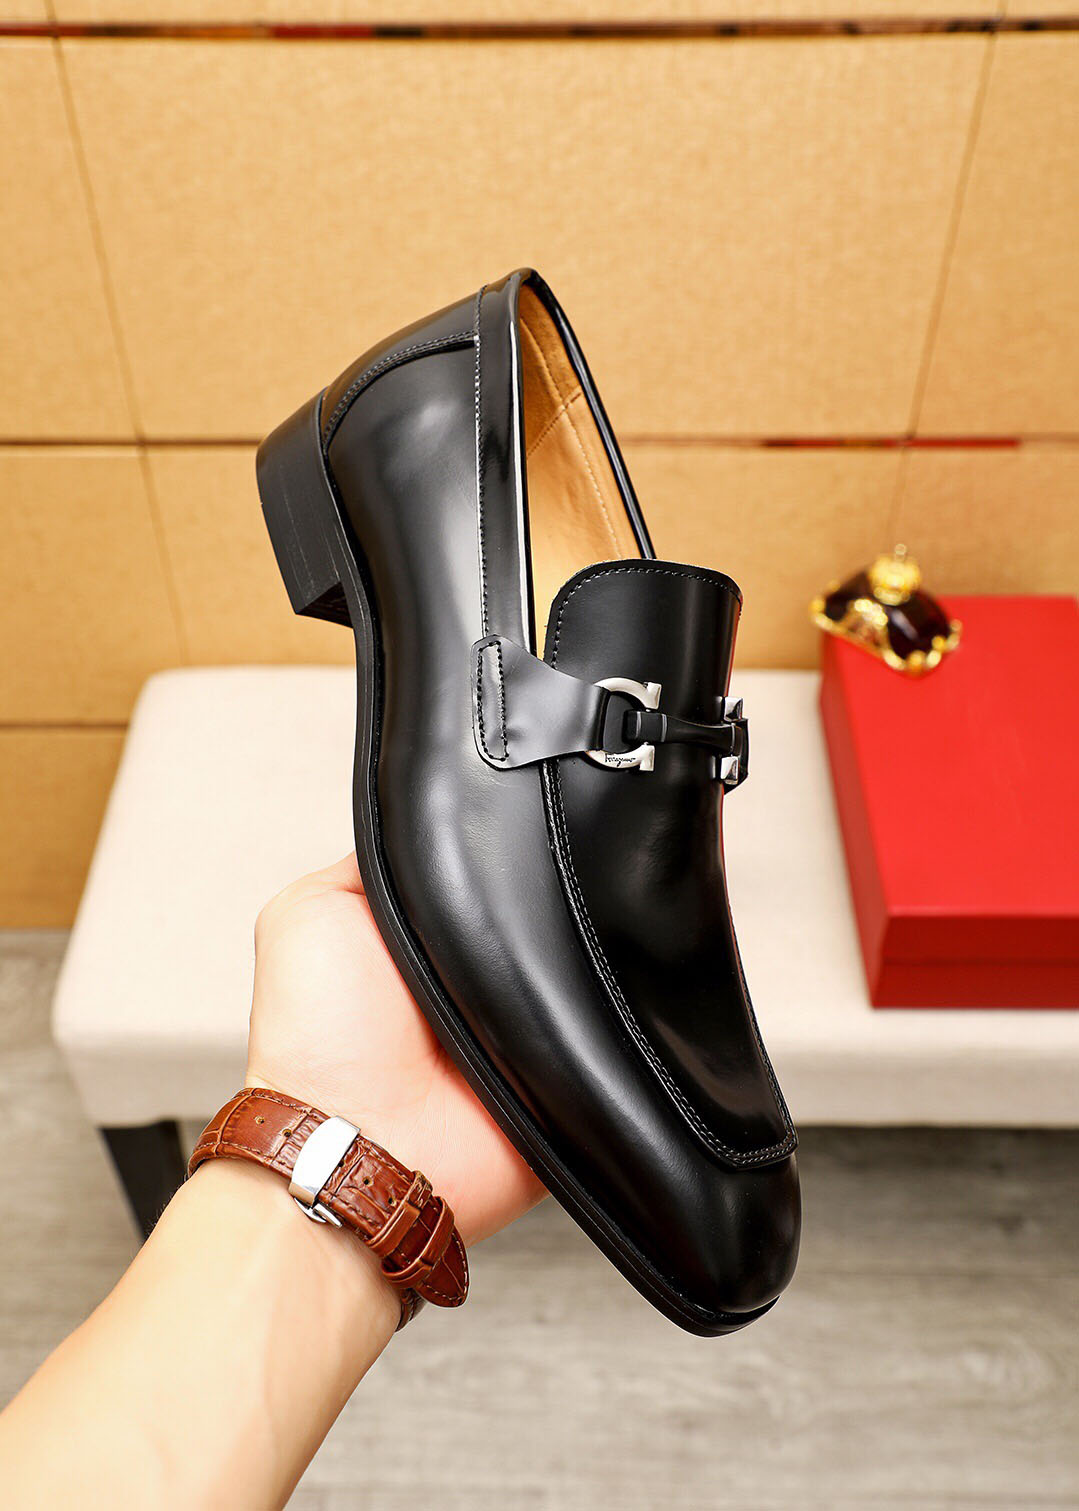 2023 Men's Dress Shoes Fashion Groom Wedding Shoes Designer Italian Leather Leather Oxfords Male Business Disual Size 38-45